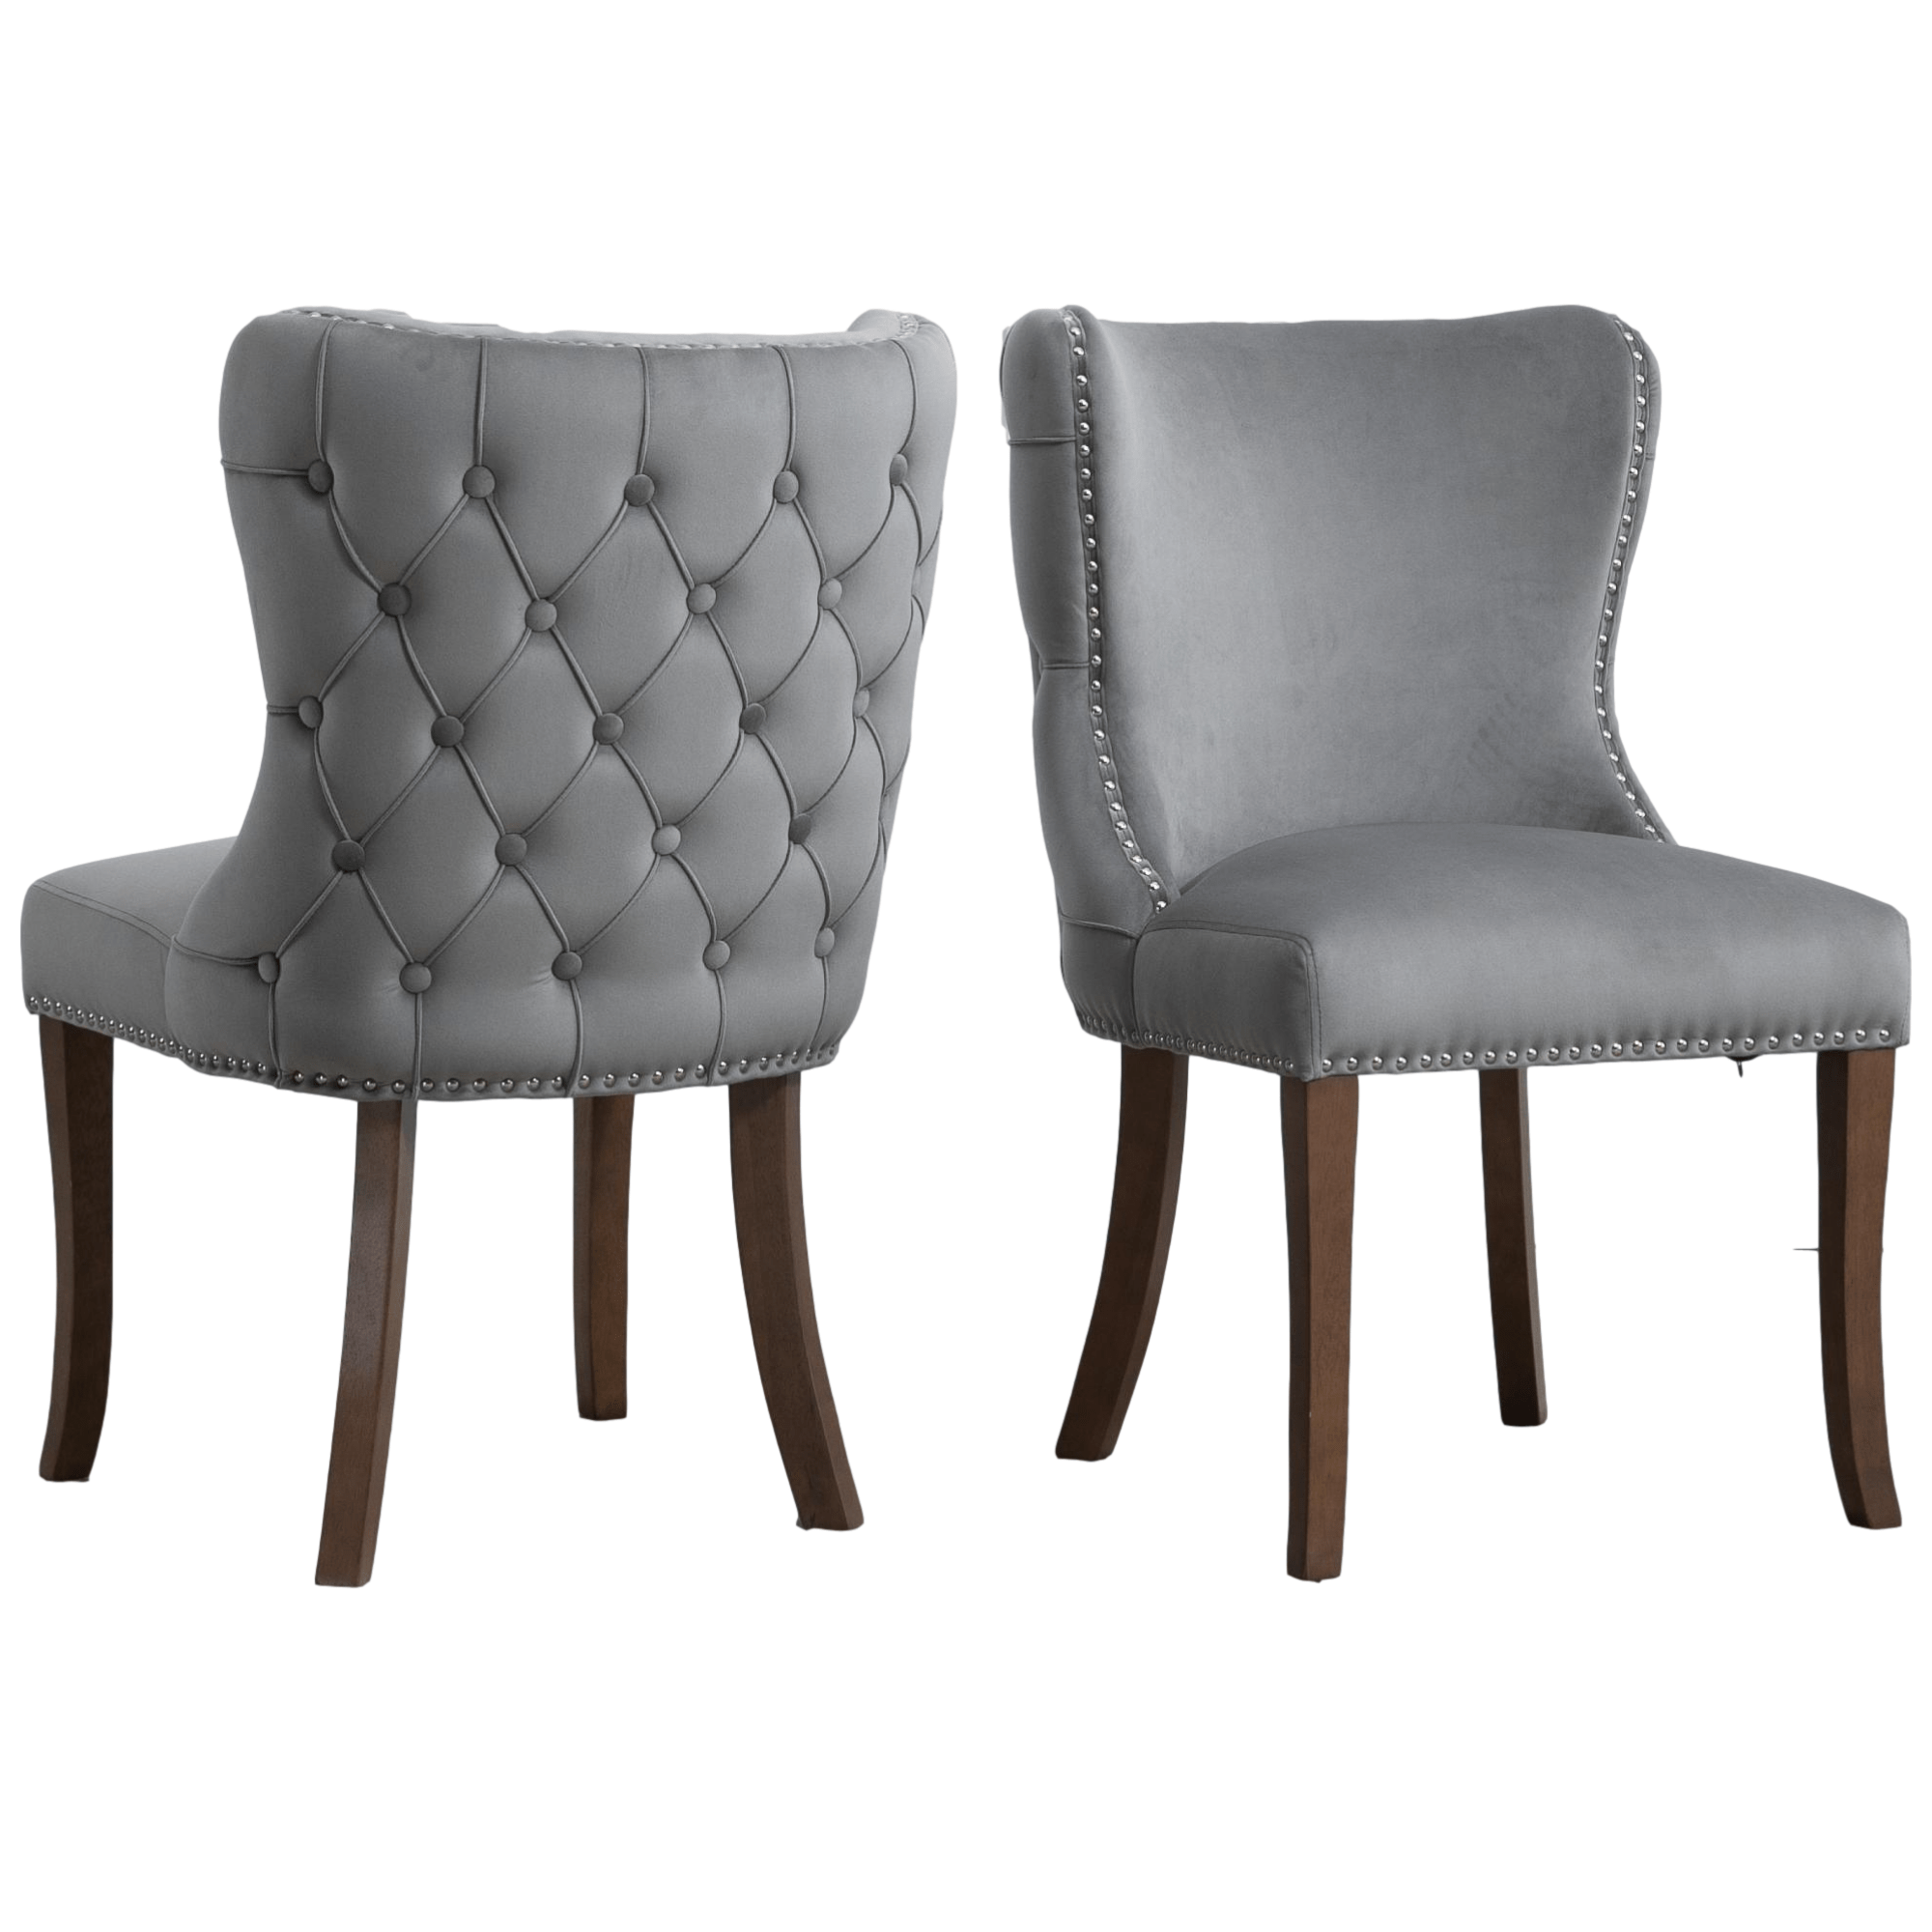 2 PCS Upholstered Wing-Back Dining Chair with Back-stitching Nail-head Trim and Solid Wood Legs